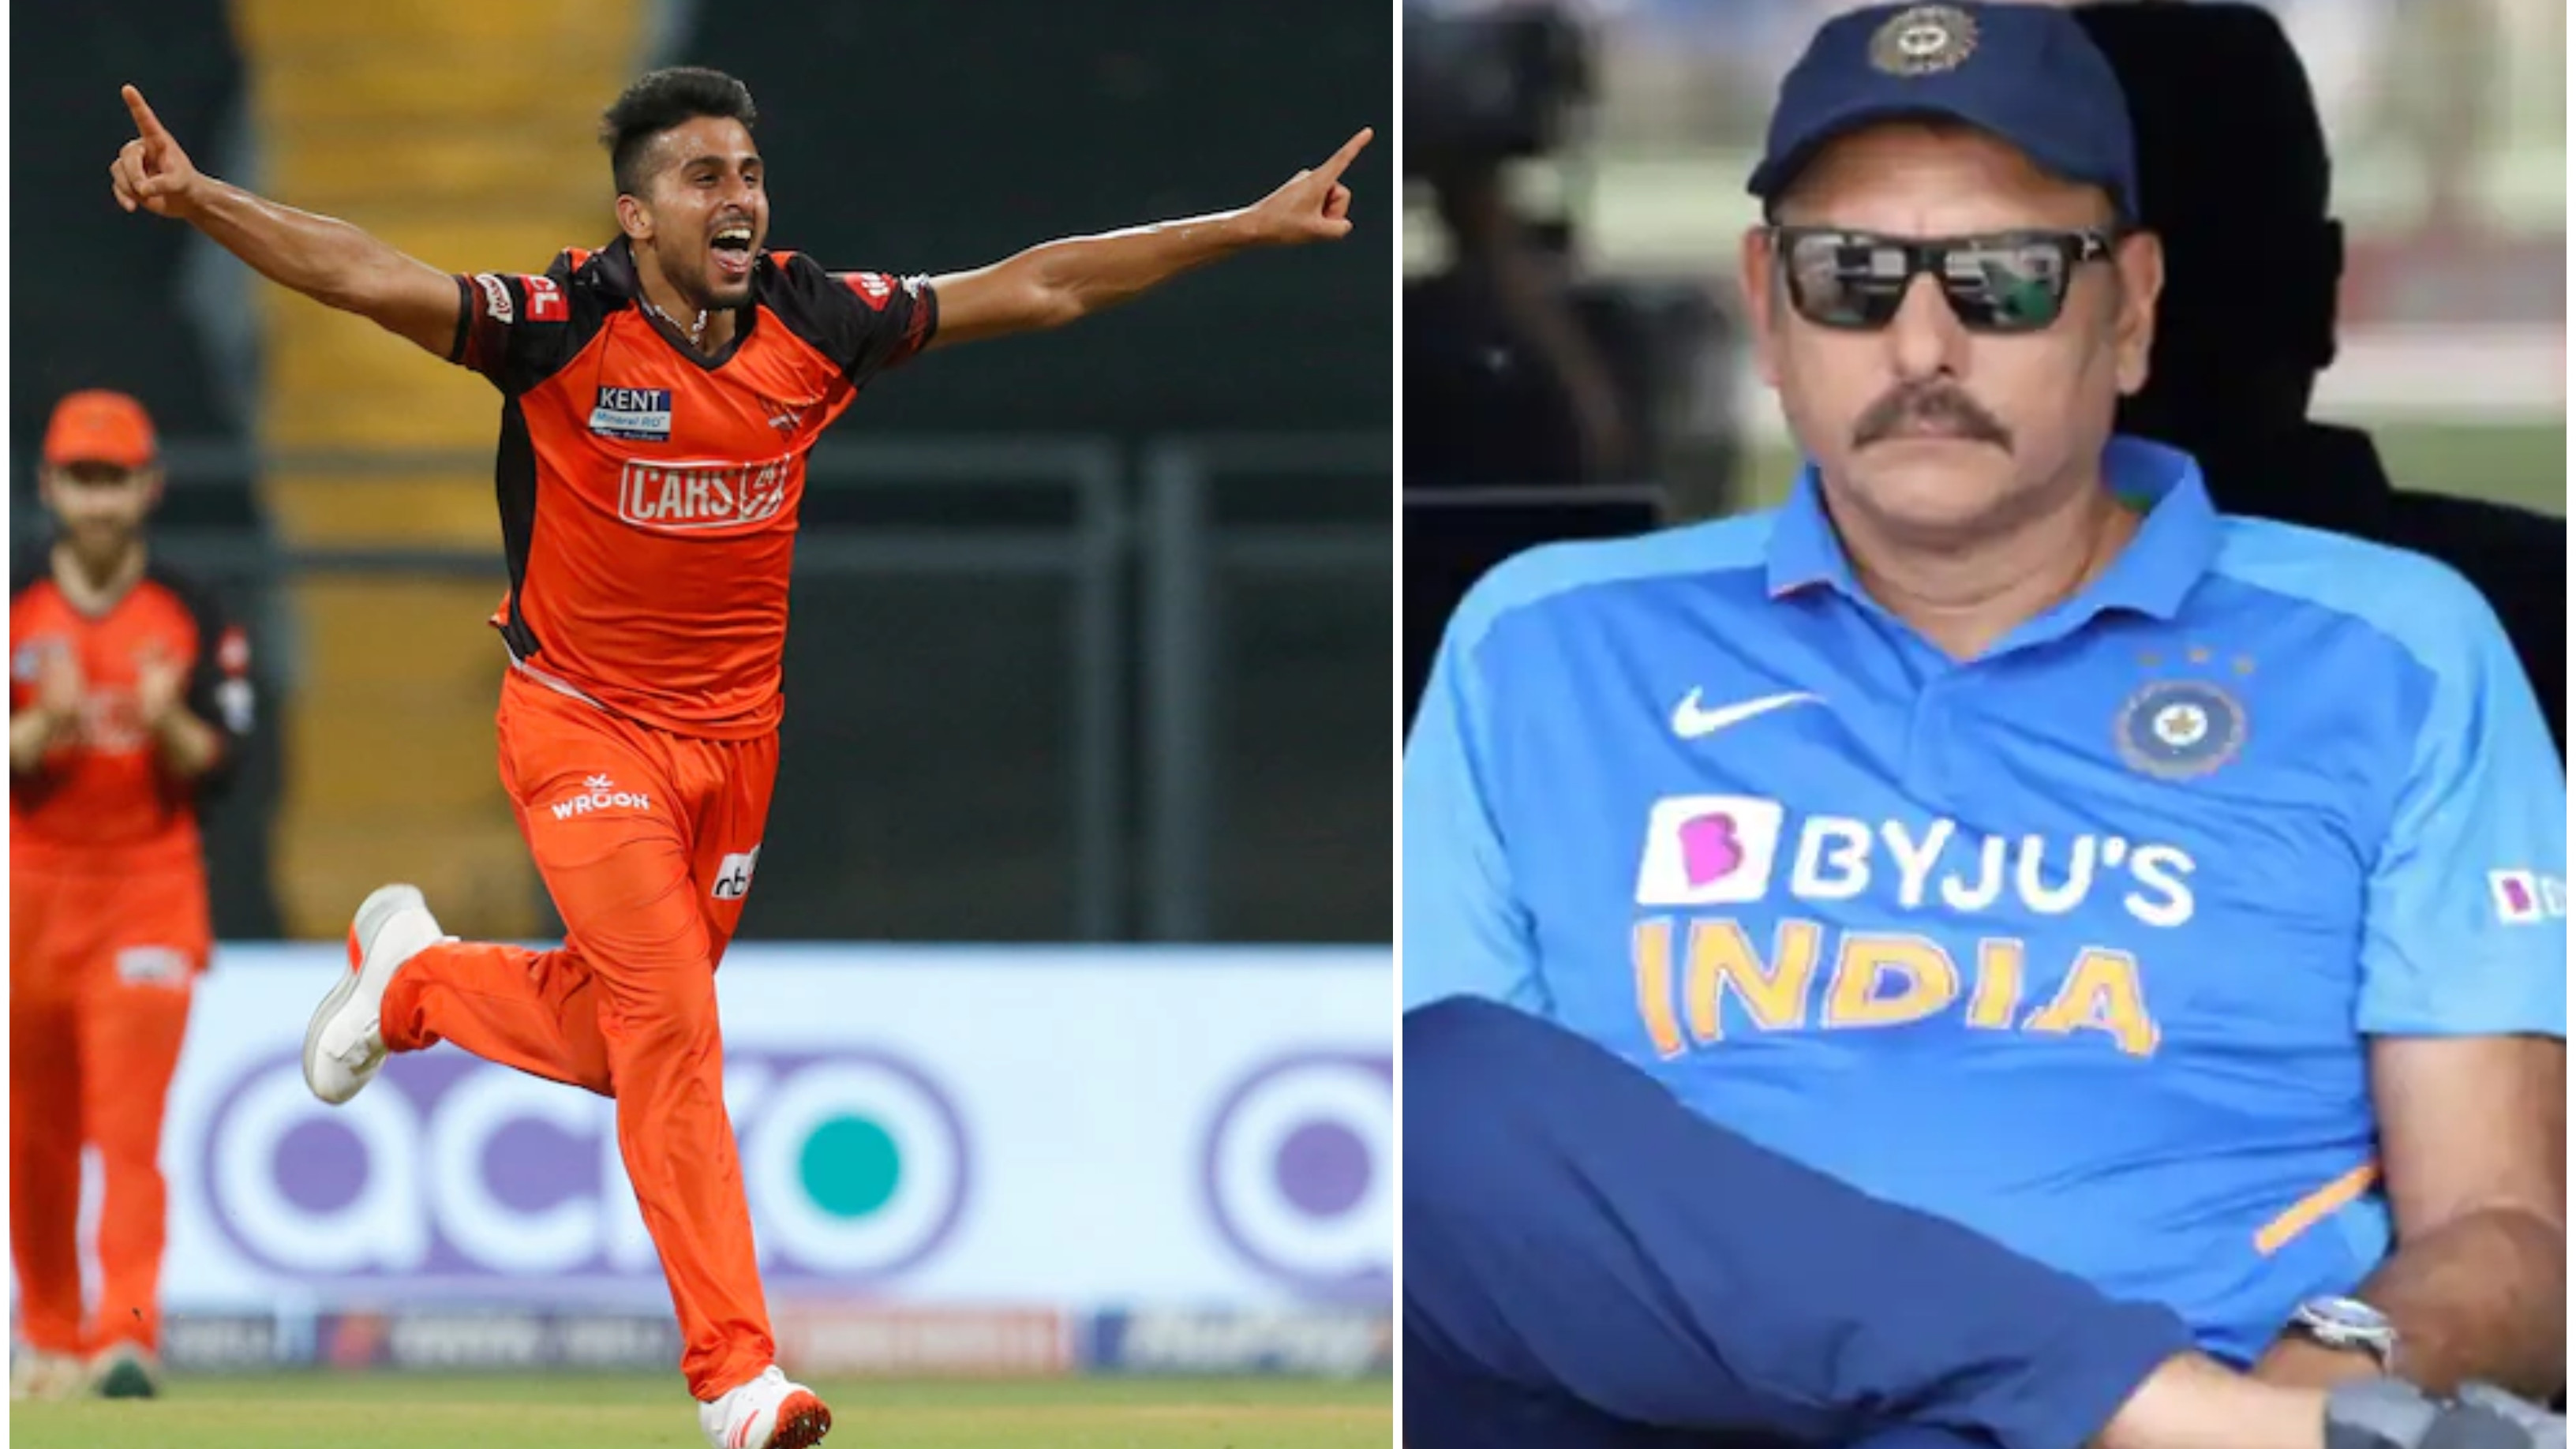 IPL 2022: “If you don't get it right that 156 kph will go for 256 off the bat”: Shastri's advice to Umran Malik